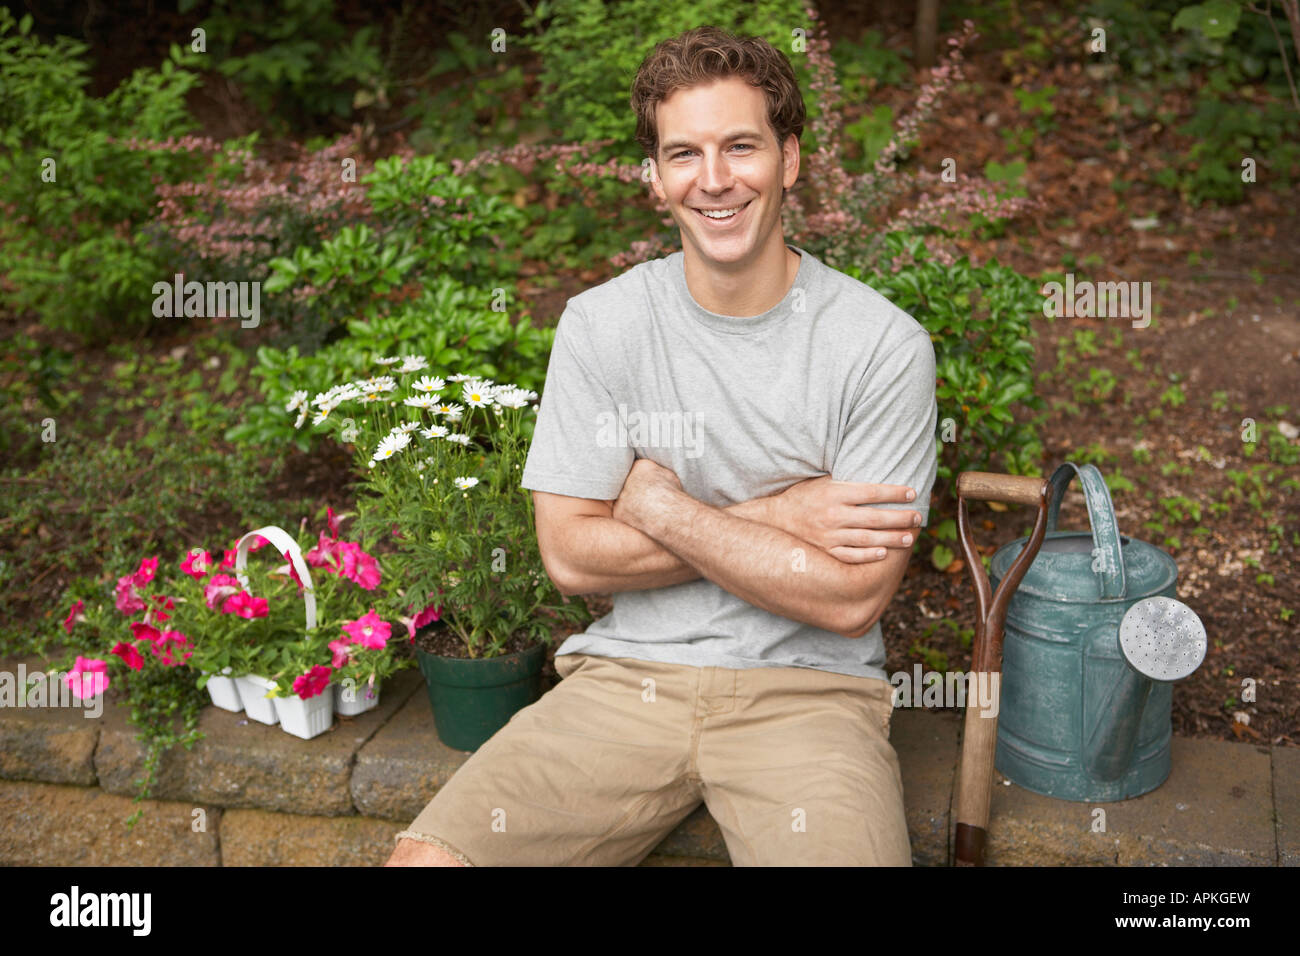 Gardener sitting by flowers and watering can (portrait) Stock Photo